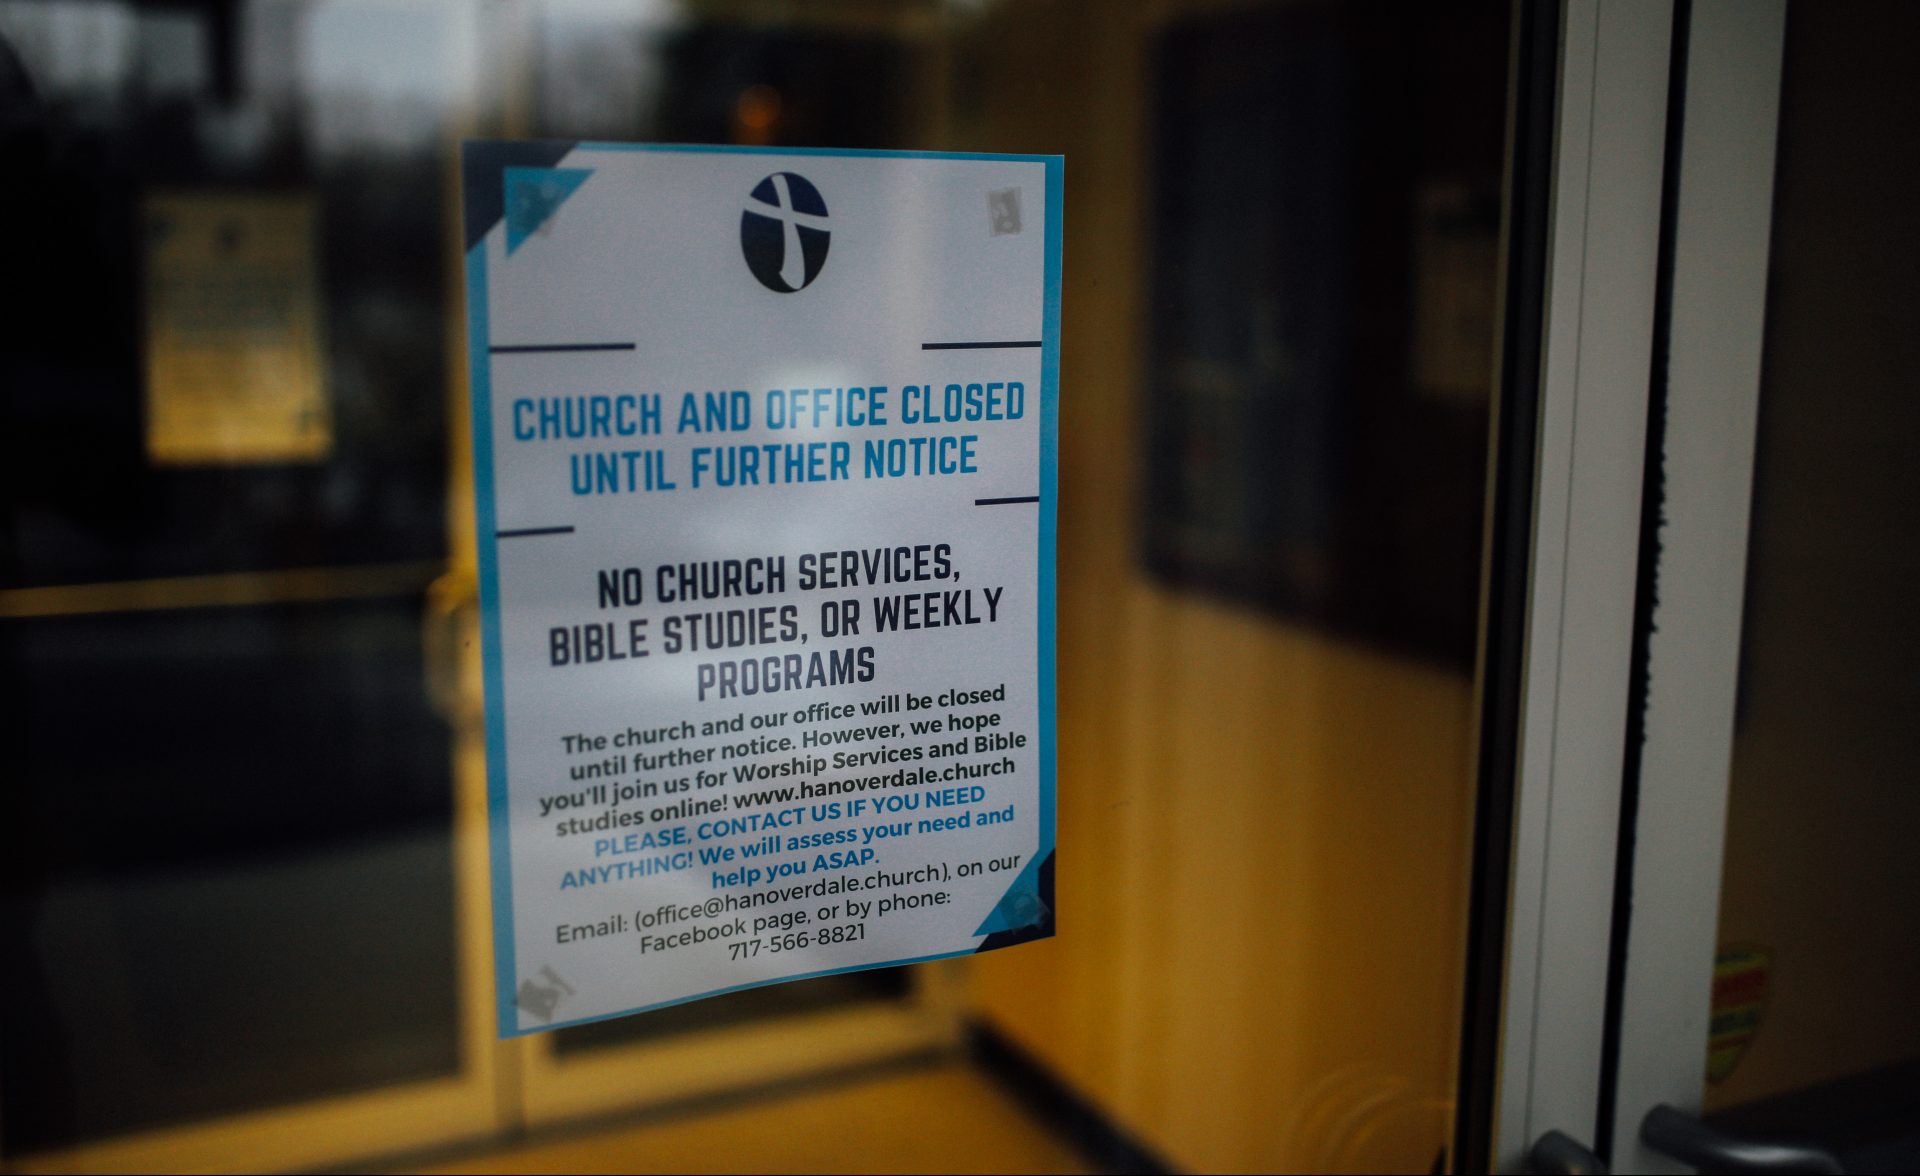 A sign on the Hanoverdale Church of The Brethren in Hummelstown, Pa., shows the church and office are closed until further notice during the coronavirus pandemic and statewide stay-at-home order.